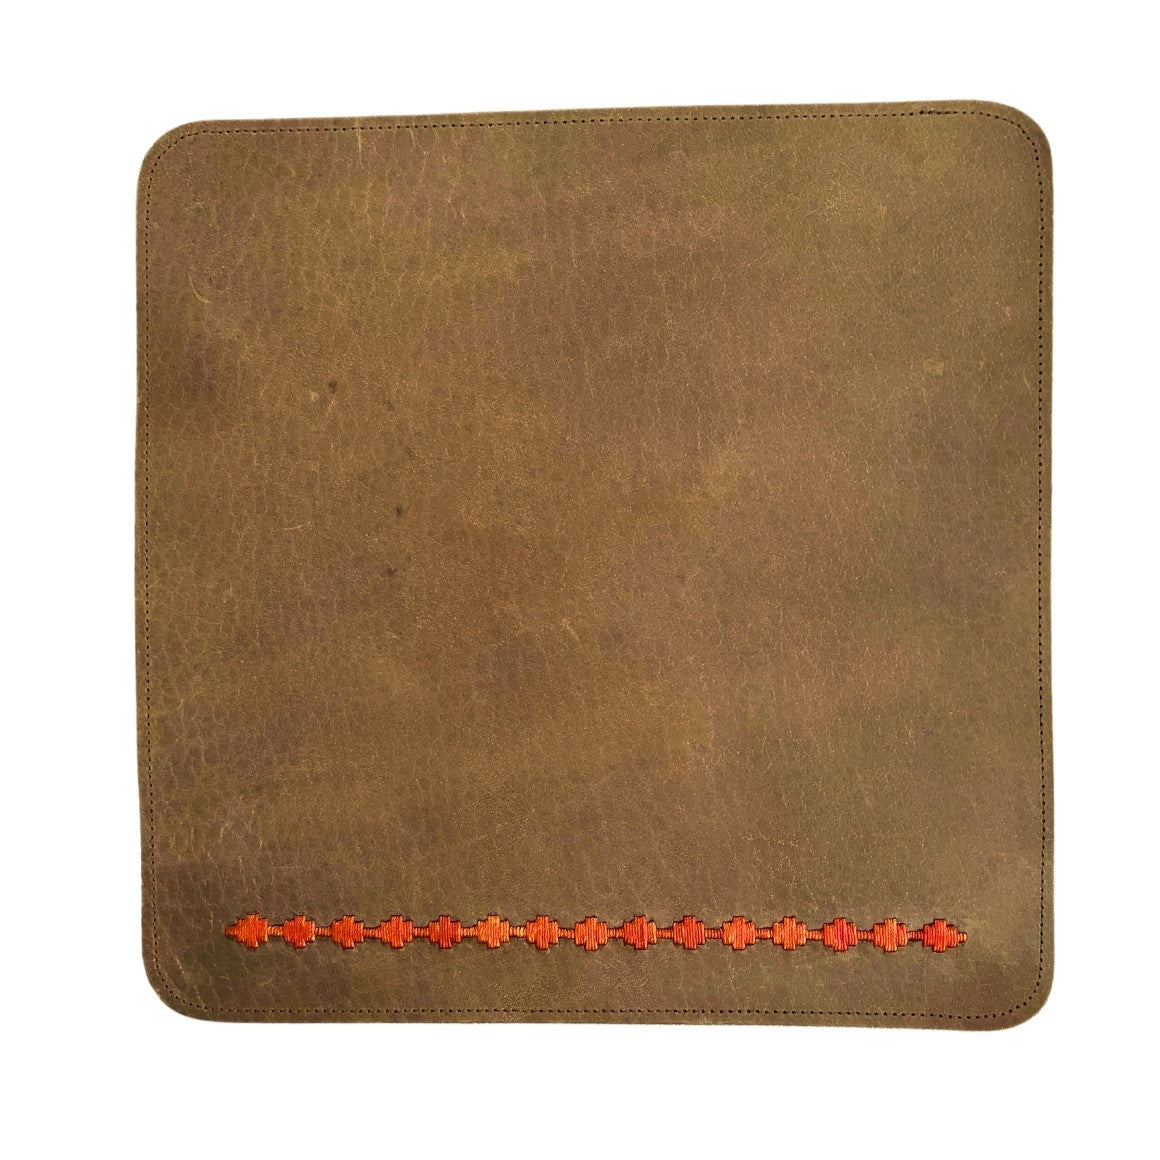 A worn brown Buffalo leather dinner mat with stitched edges, featuring a row of small, embossed red flowers along the lower edge. The surface shows slight marks and variations in color typical of used leather by Georgie Paws.